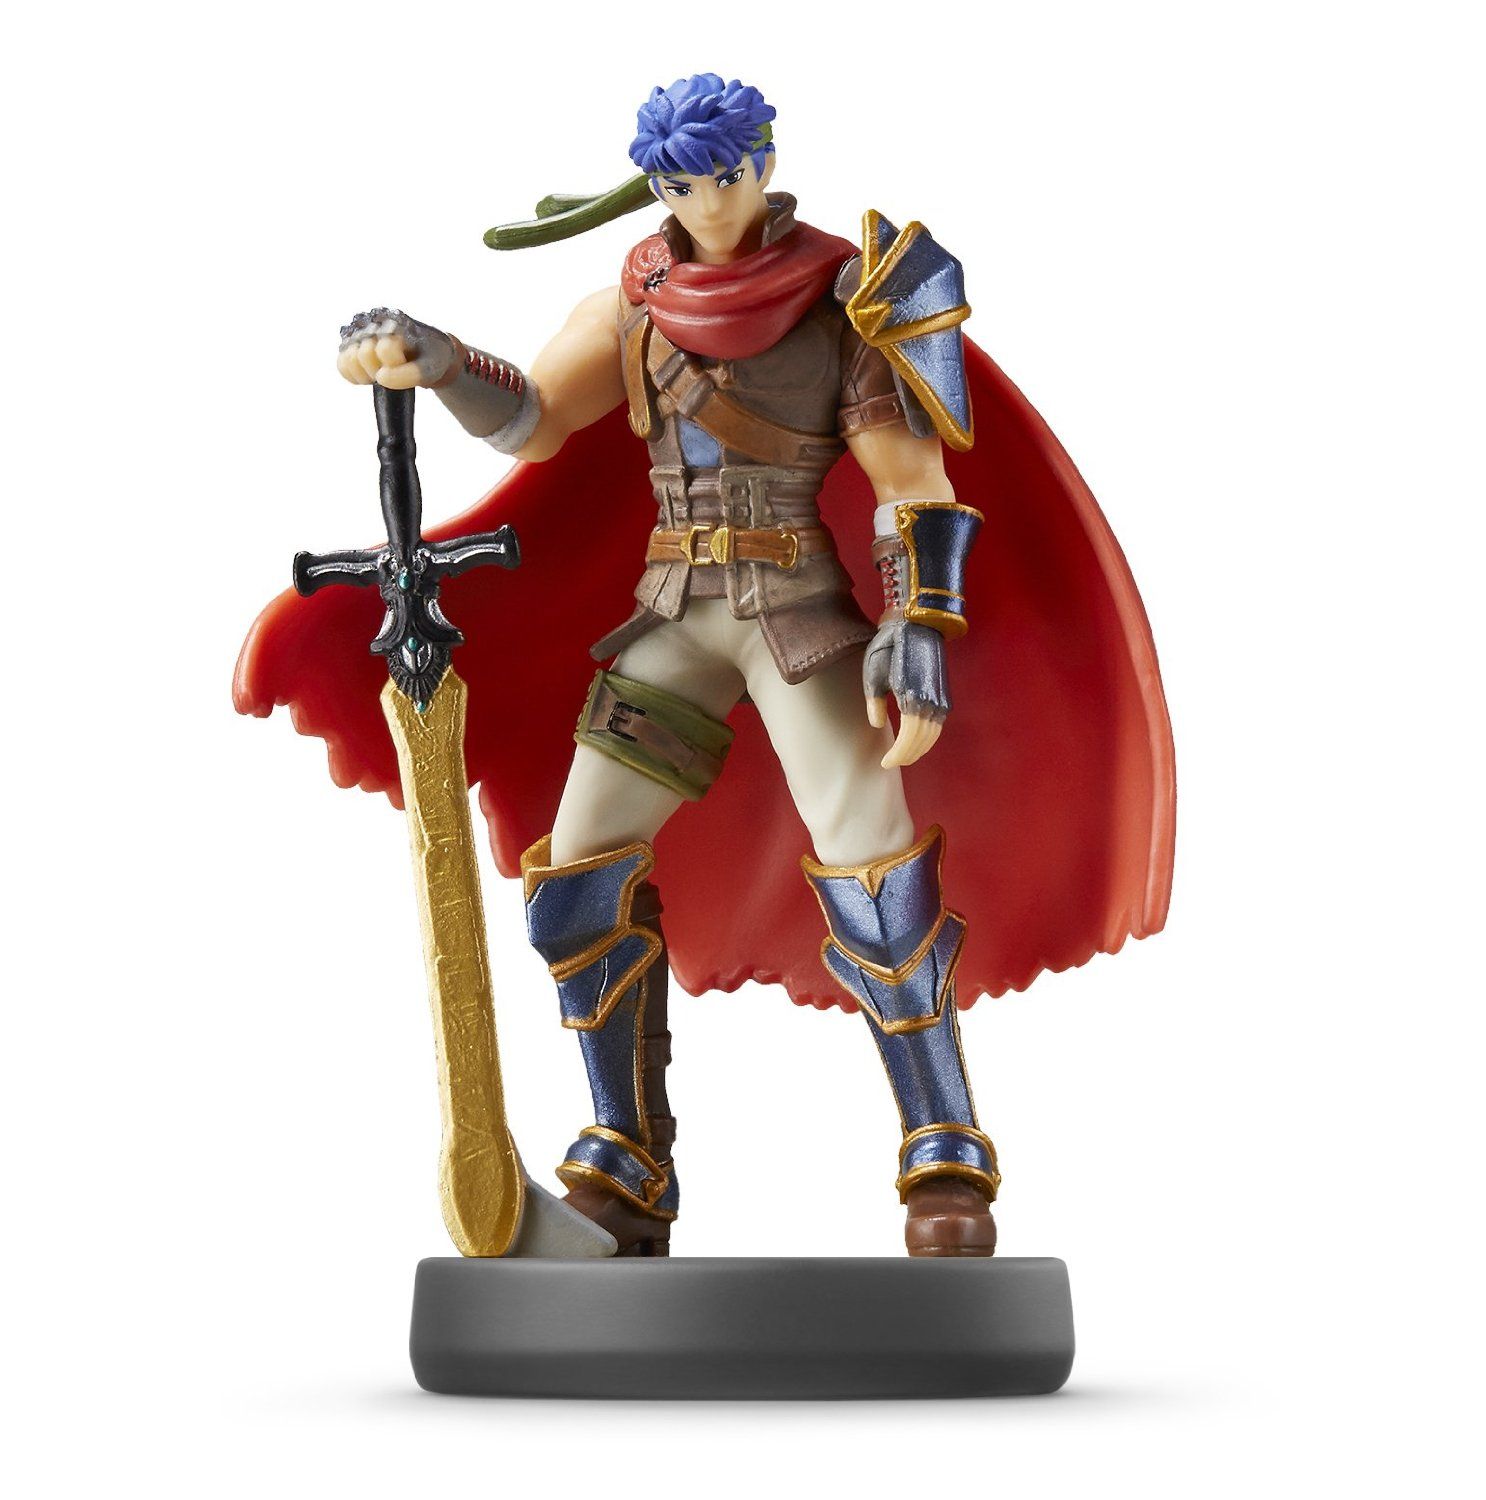 best amiibo for switch